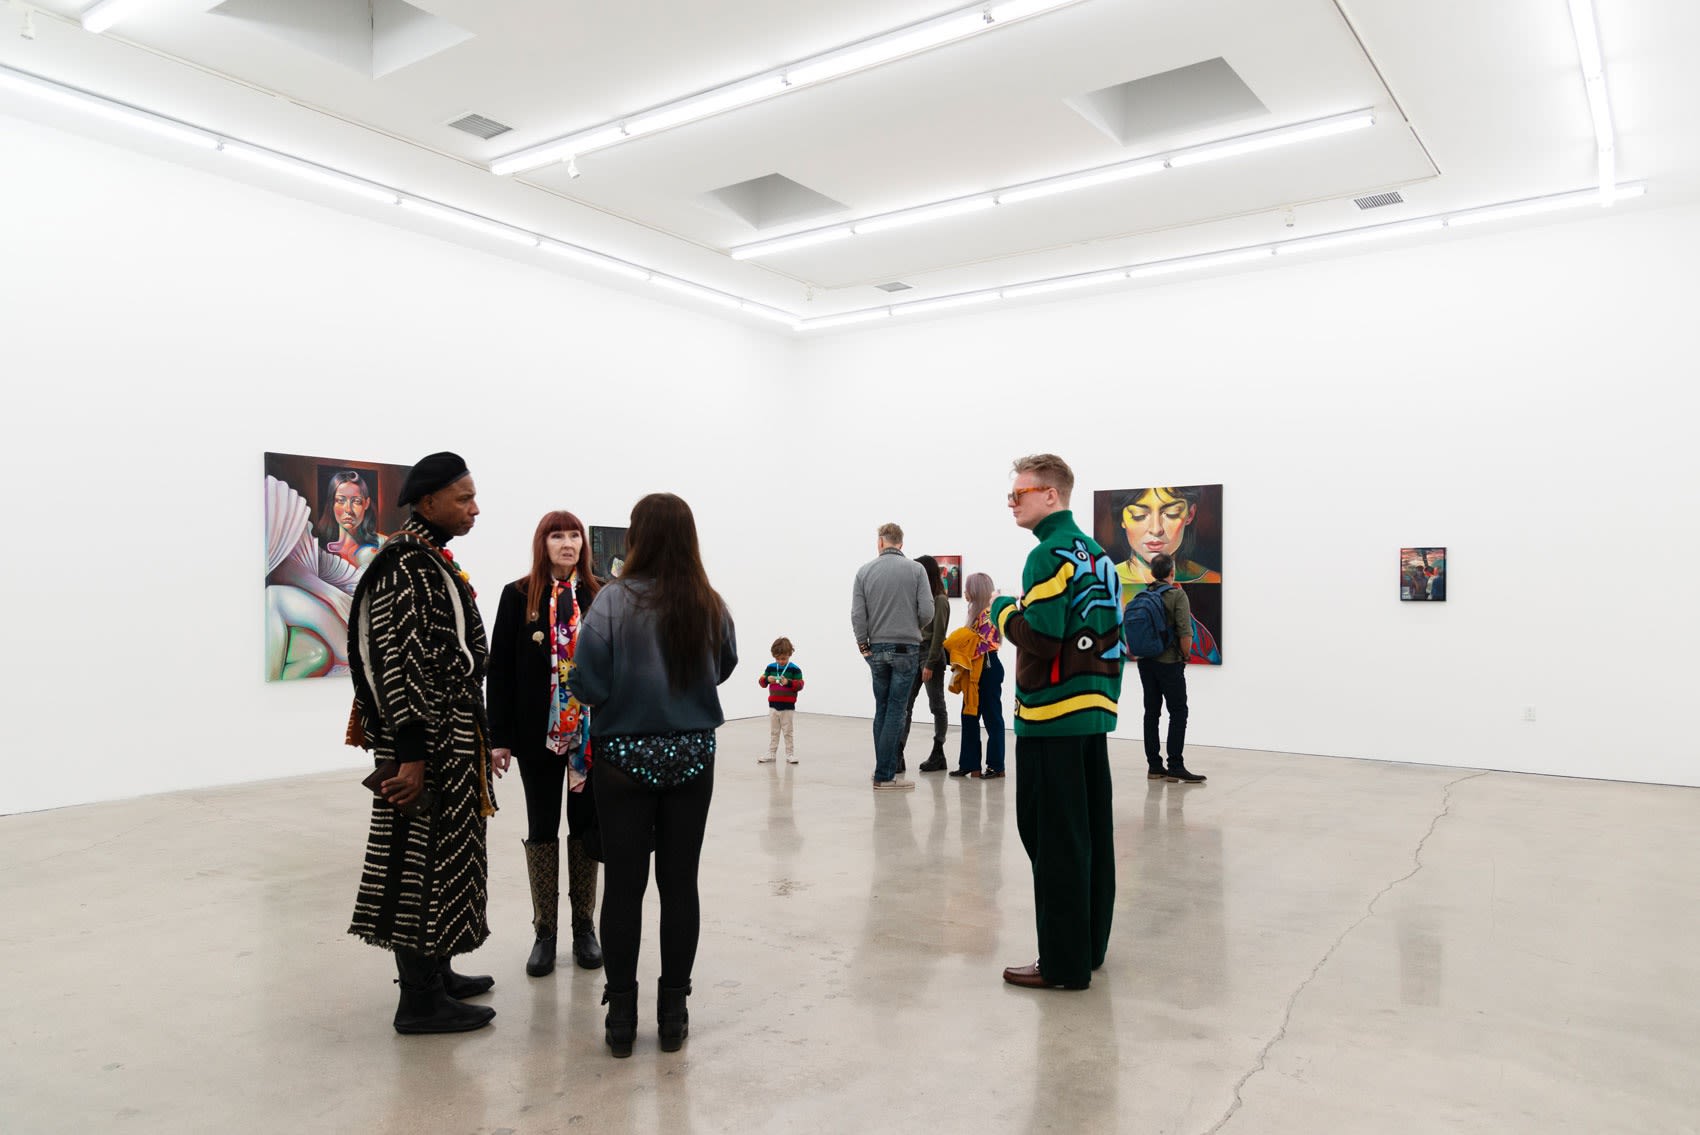 A crowd of people gather and converse inside the opening of Martine Johanna's solo exhibition A Particular Ghost. The exhibition shows paintings of women on a white wall, the gallery has some natural light and a concrete floor. 